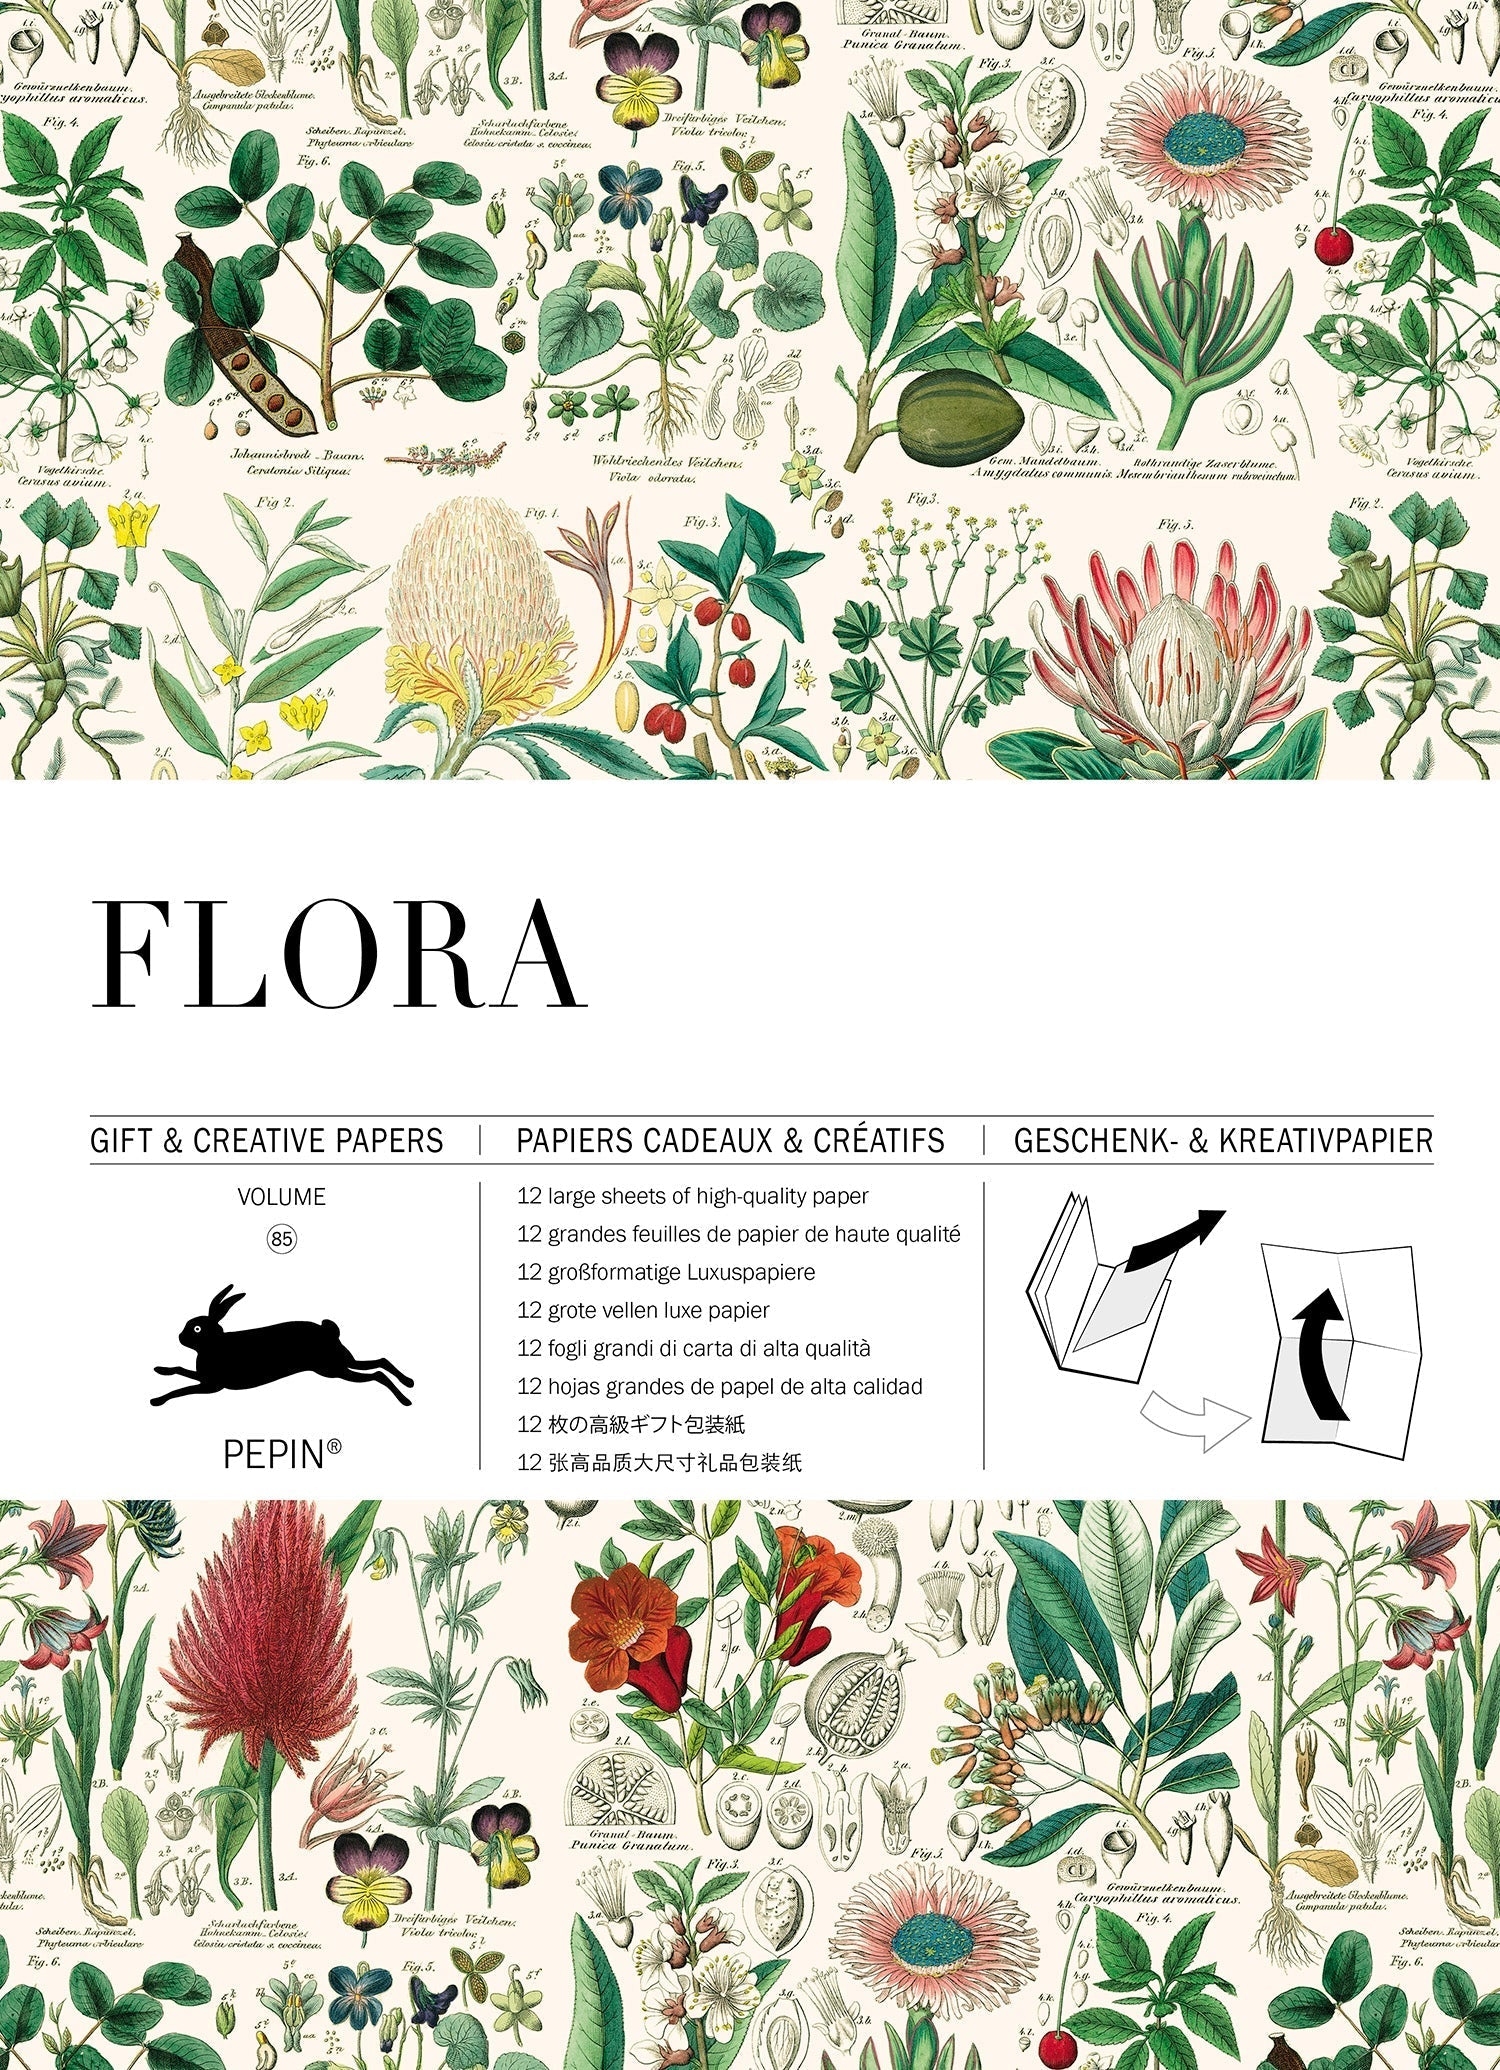 Gift & creative papers - Flora